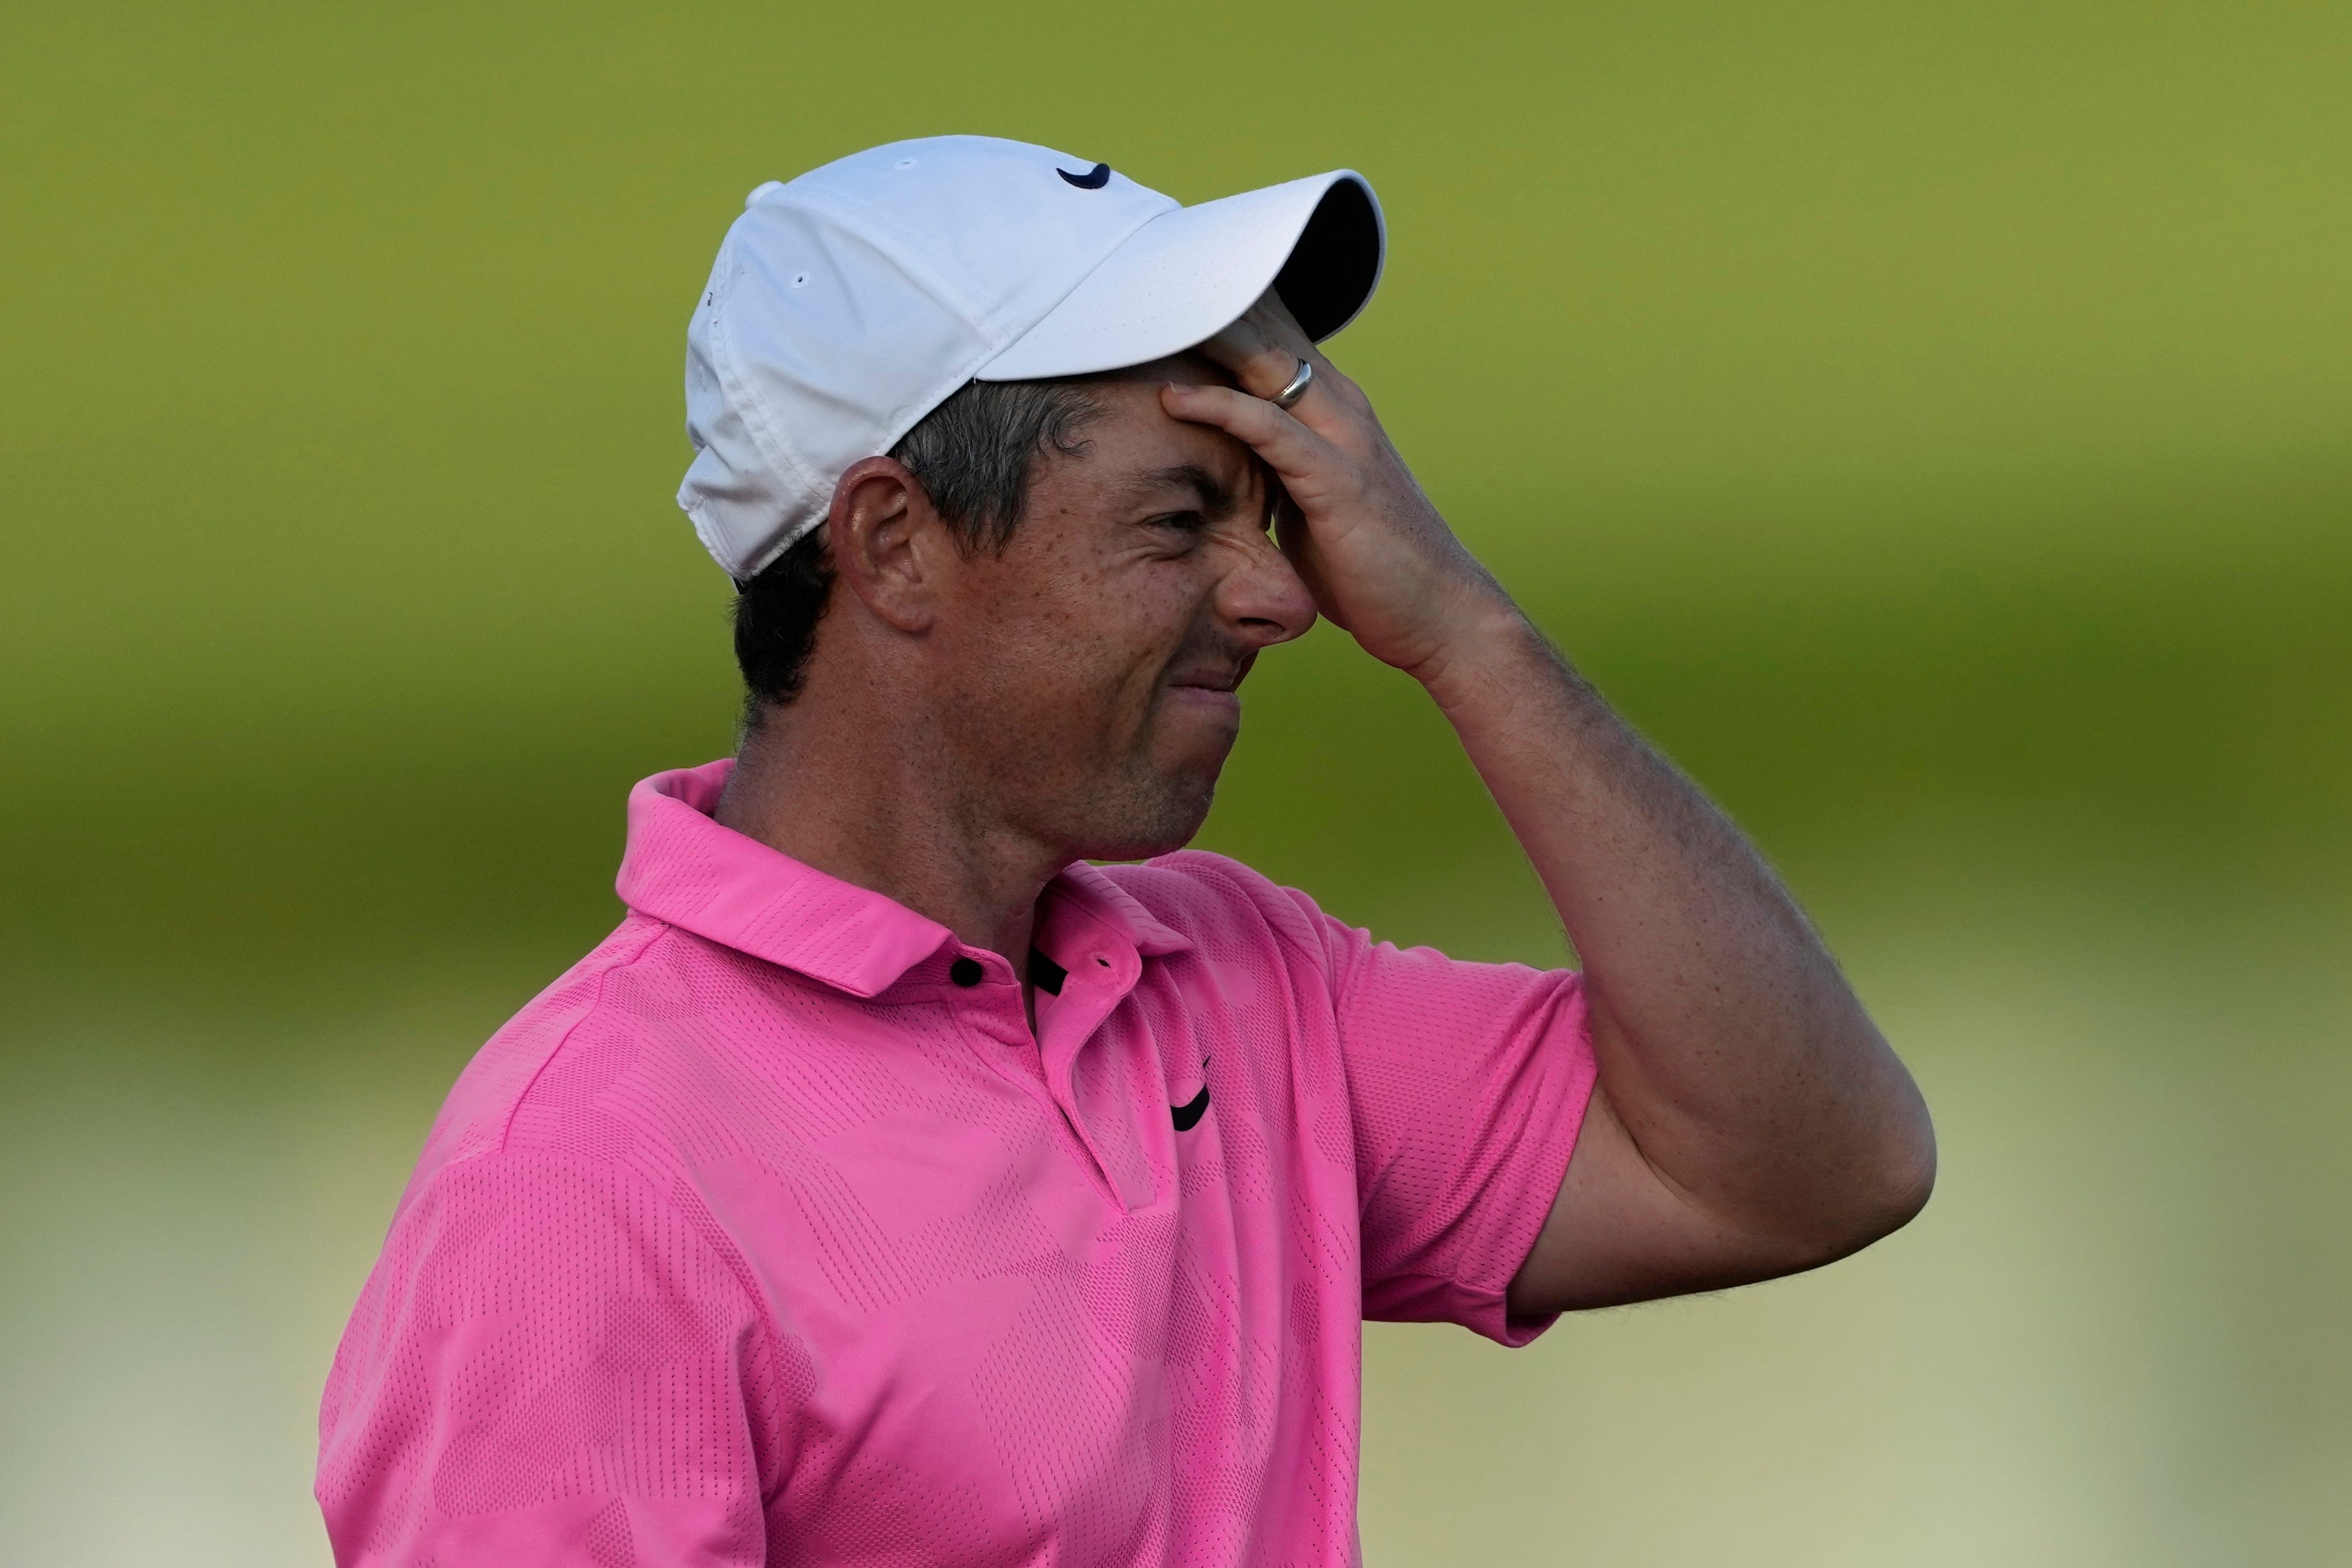 McIlroy disappointingly bogeyed the 18th, although is still in control of the tournament